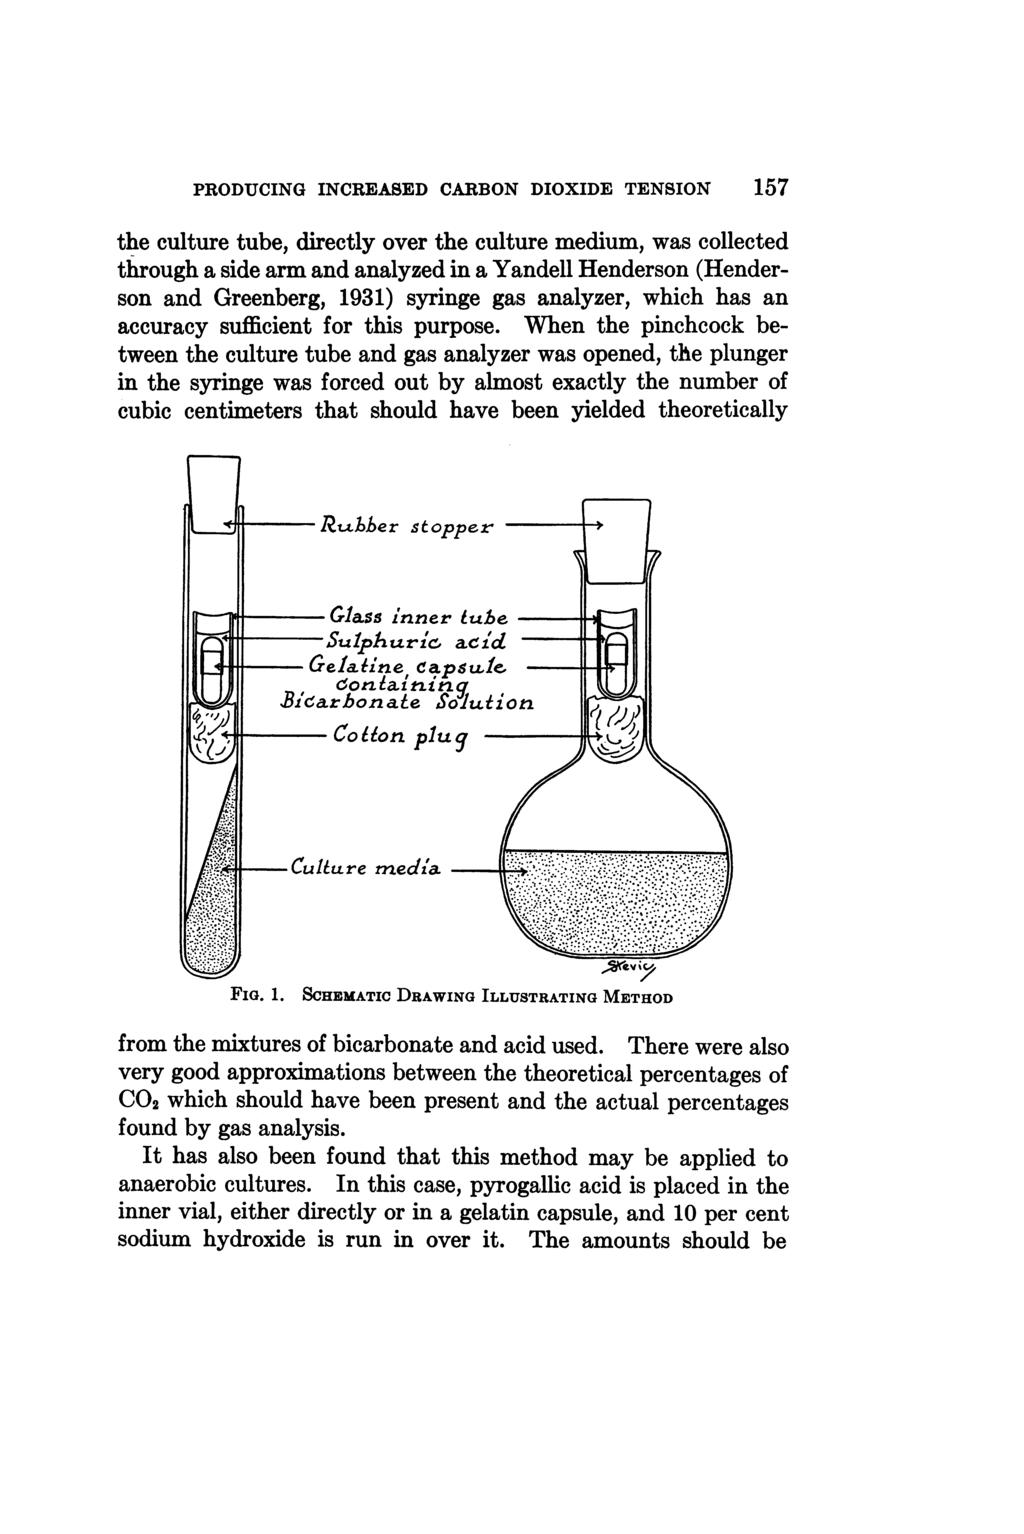 PRODUCING INCREASED CARBON DIOXIDE TENSION the culture tube, directly over the culture medium, was collected through a side arm and analyzed in a Yandell Henderson (Henderson and Greenberg, 1931)